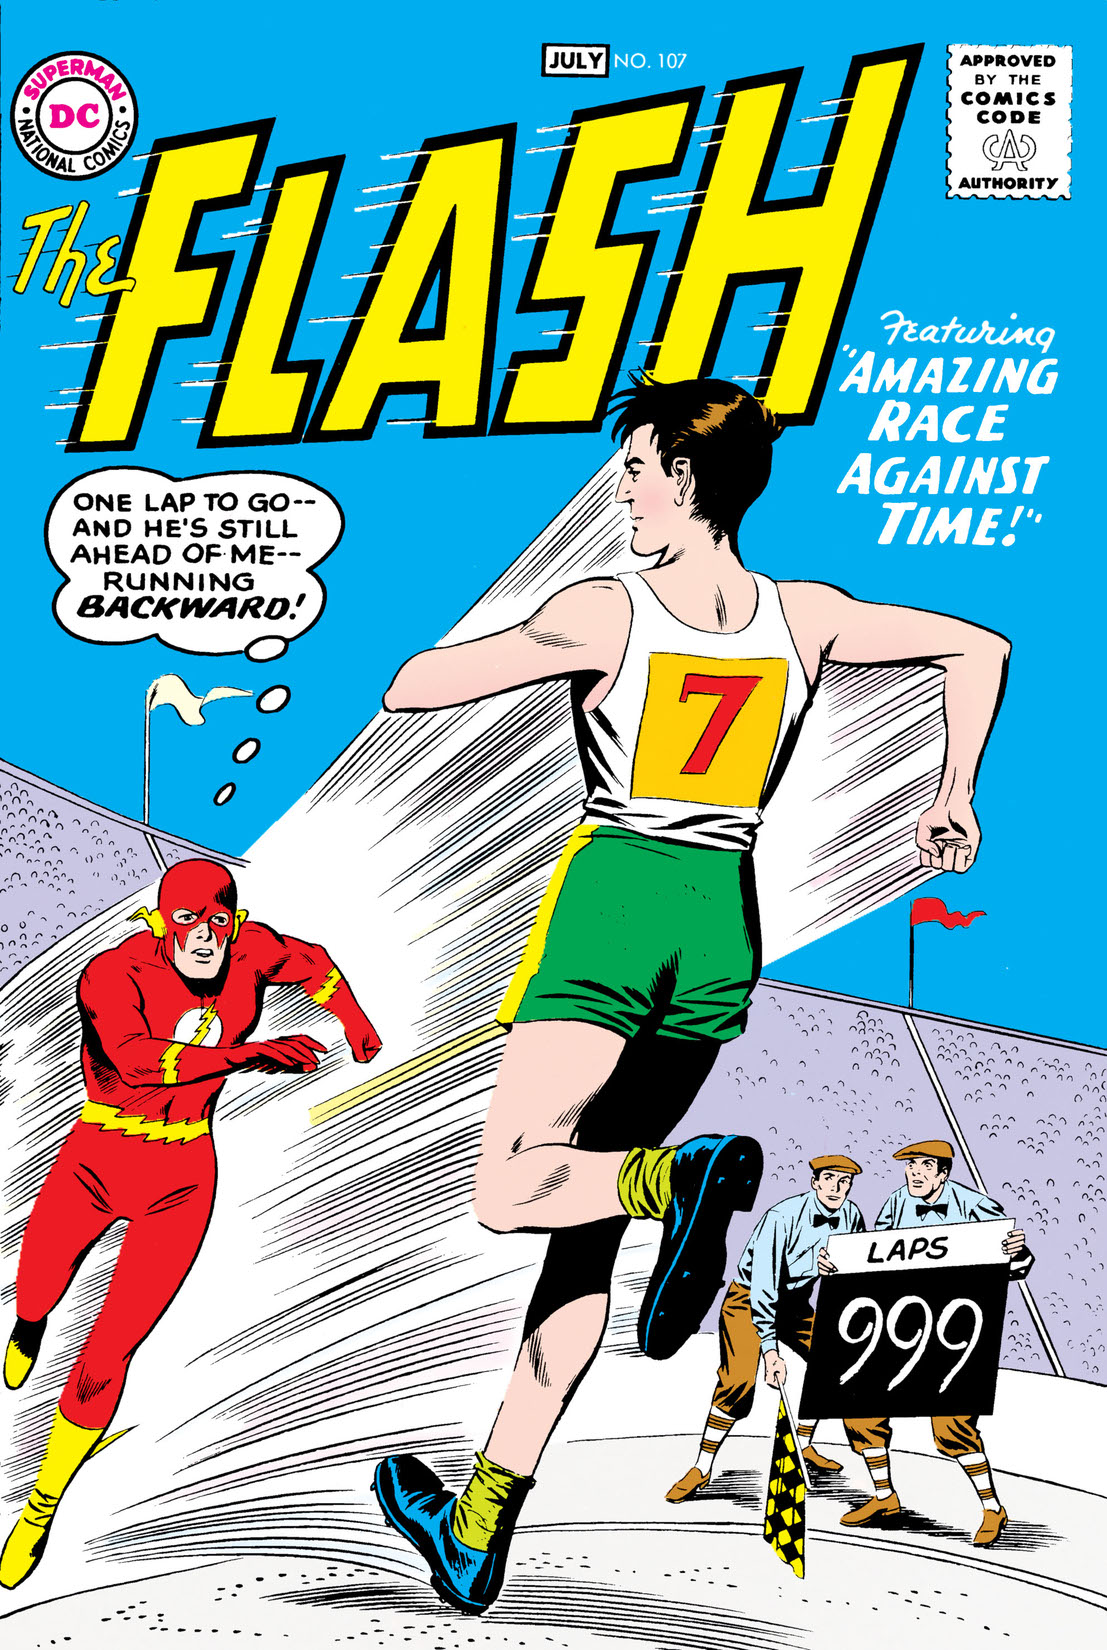 The Flash (1959-) #107 preview images